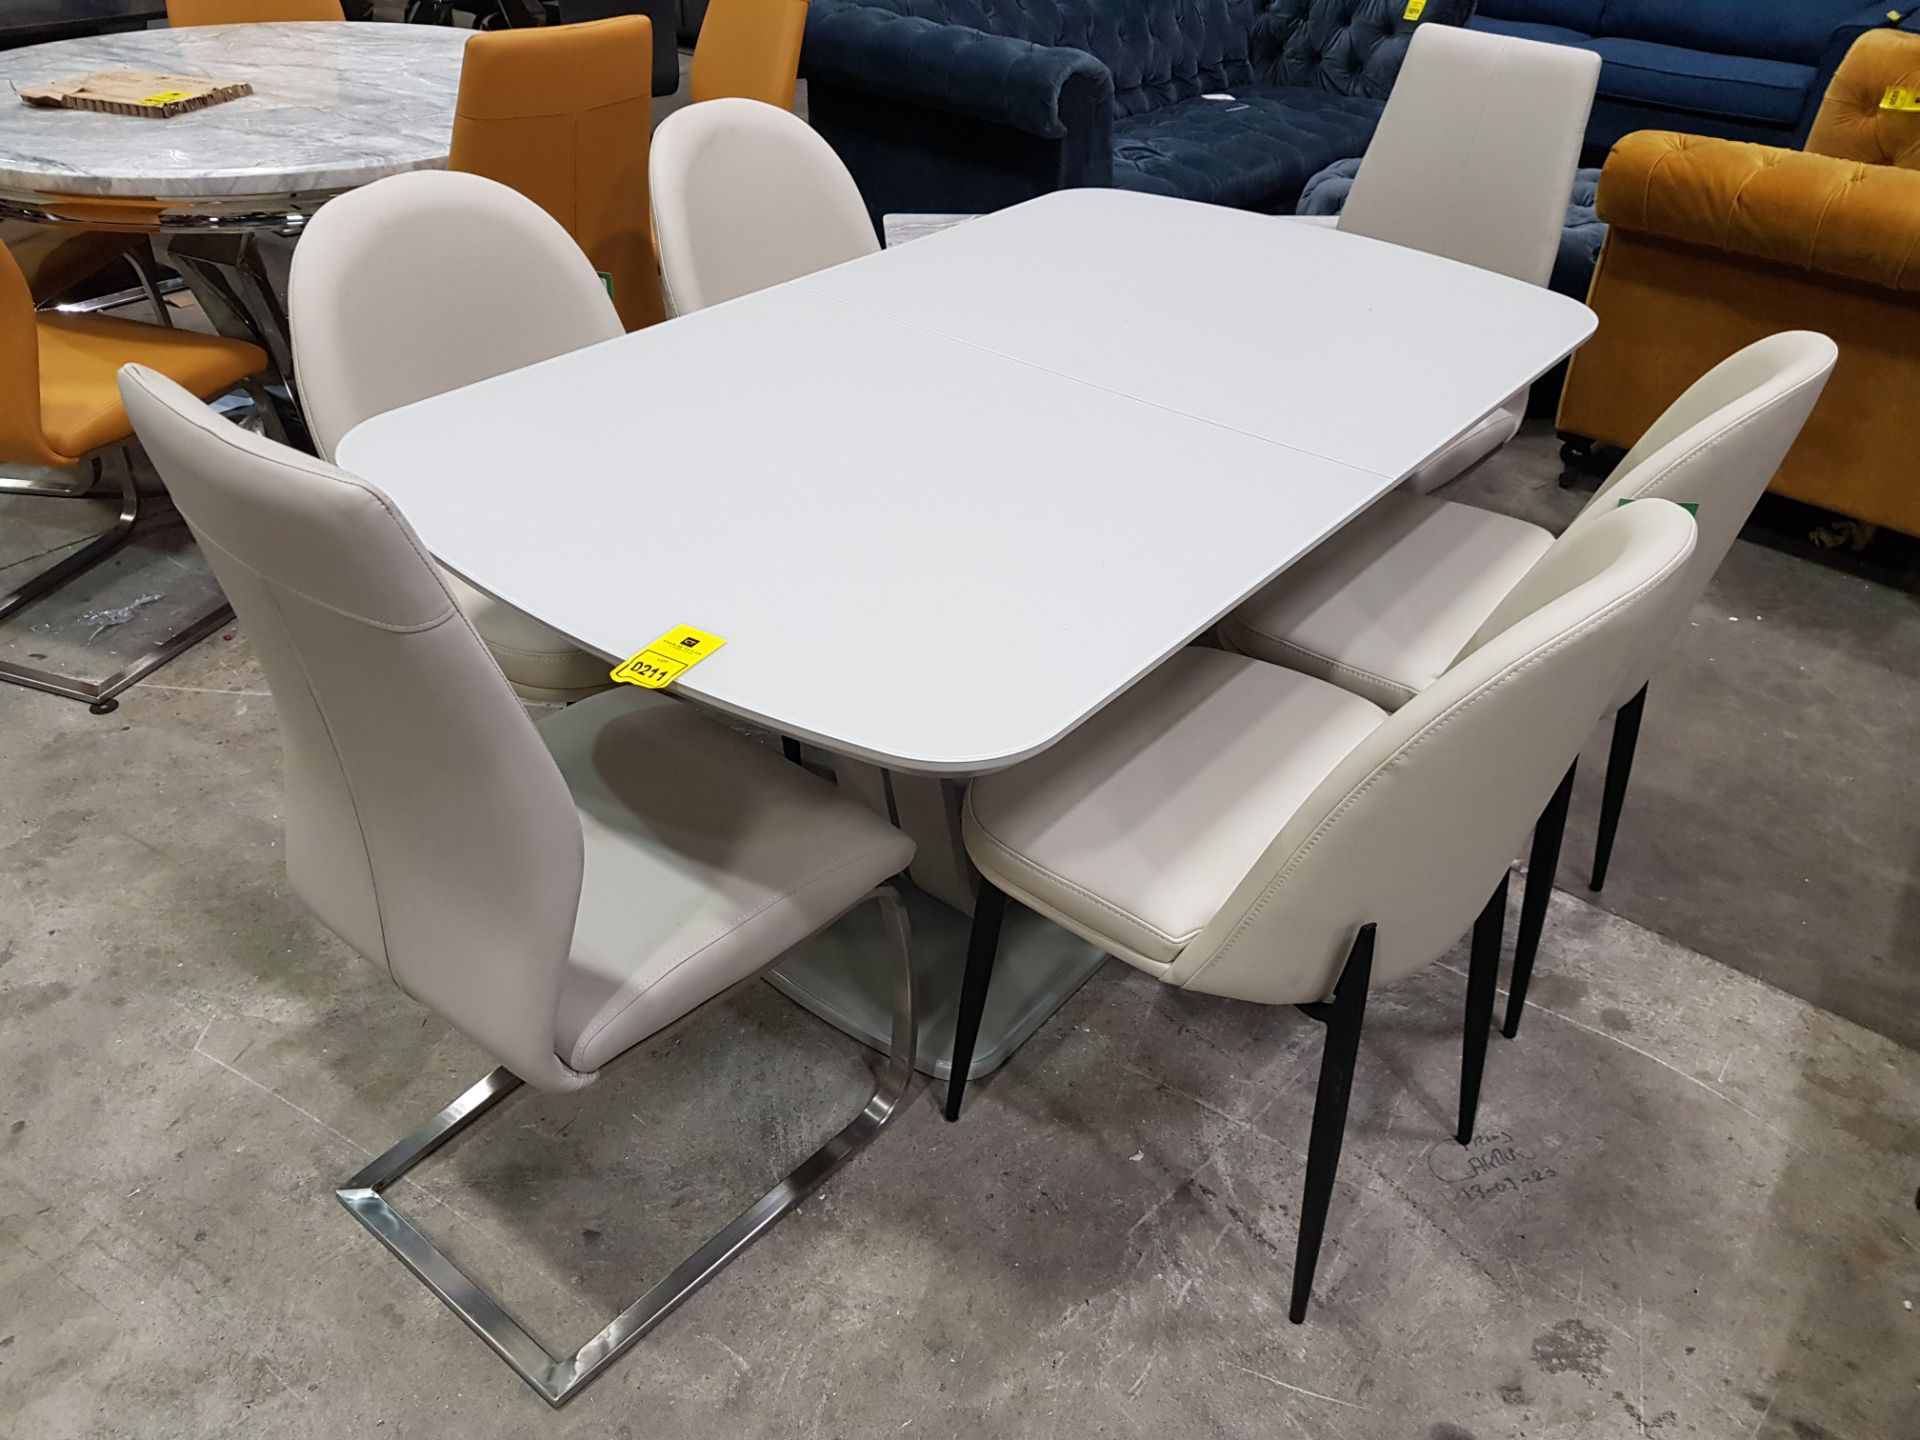 1 X LAZZARO DINING TABLE IN LIGHT GREY EXTENDING 1600/2000 X 900mm WITH 6 X LEATHER GREY CHAIRS IN 2